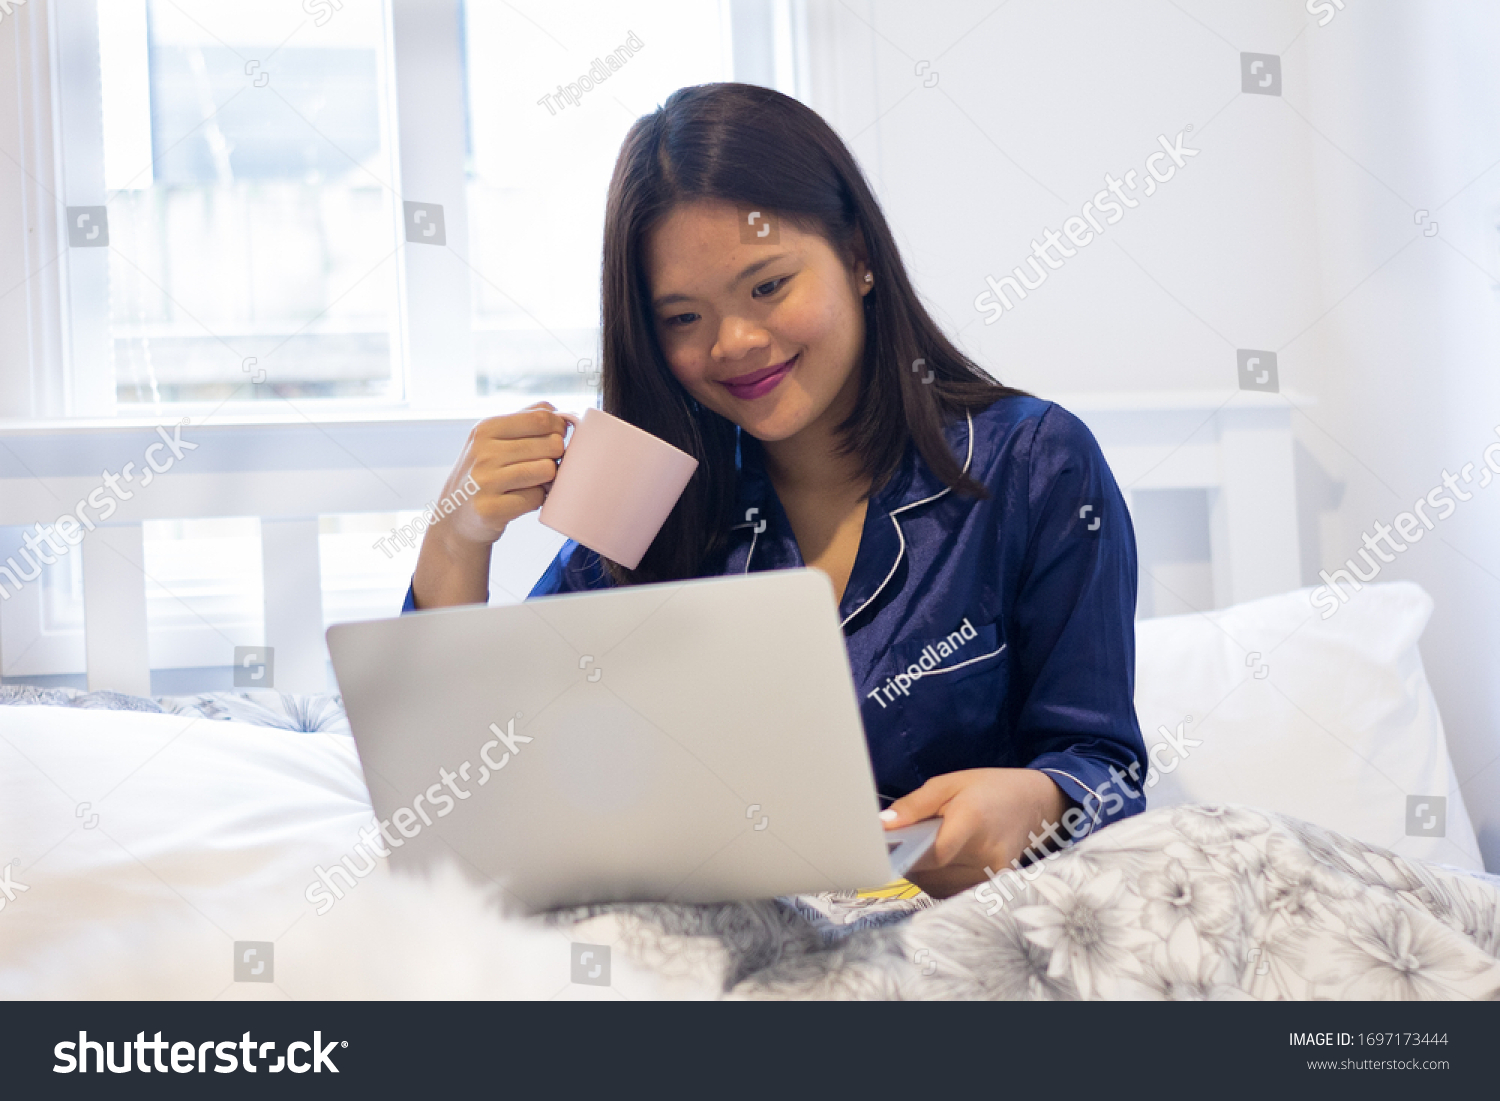 Young asian smiling woman working on laptop while holding a pink mug. Happy morning #1697173444